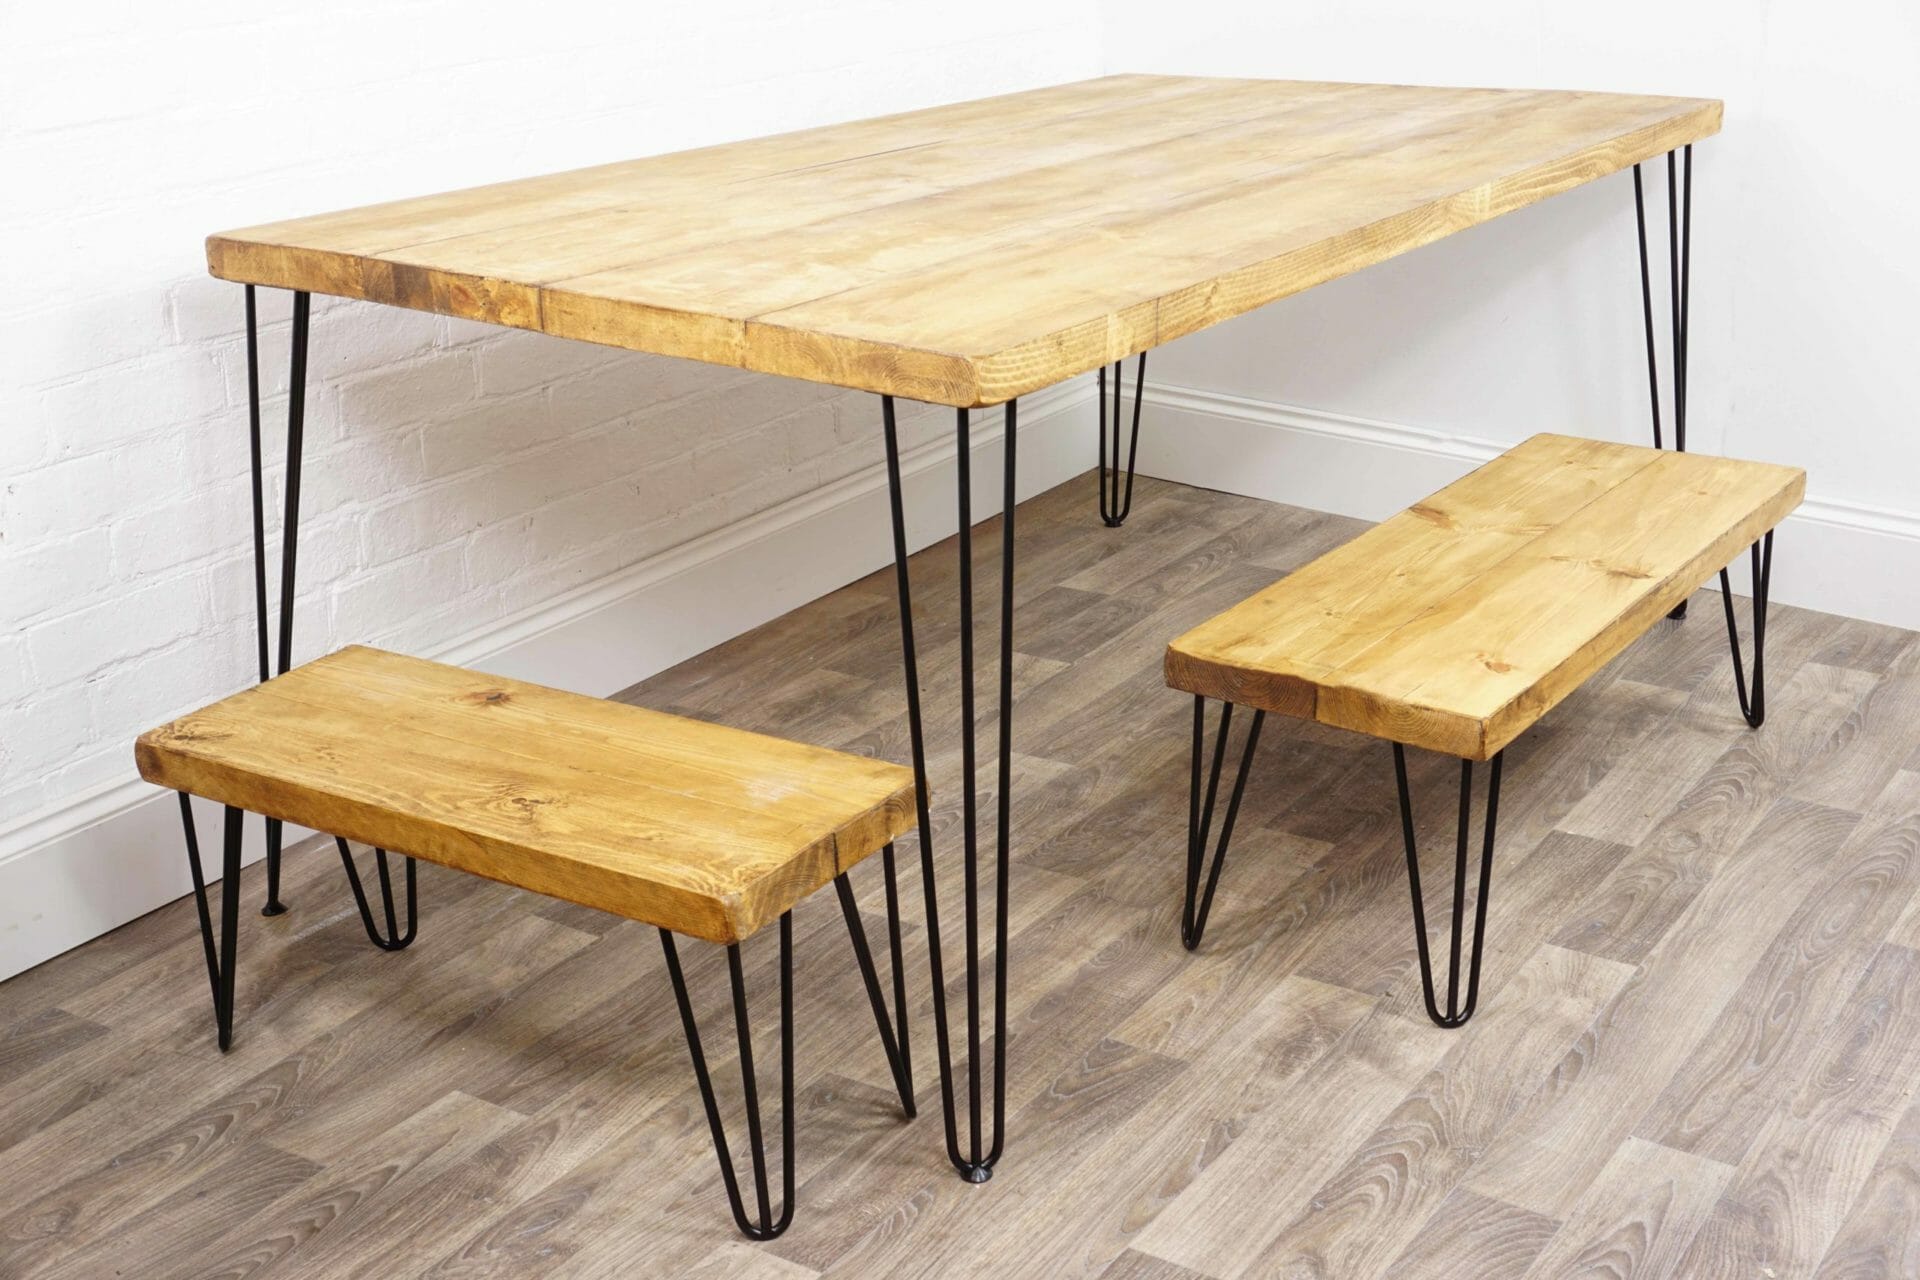 Reclaimed wooden kitchen table with black steel hairpin legs and matching benches